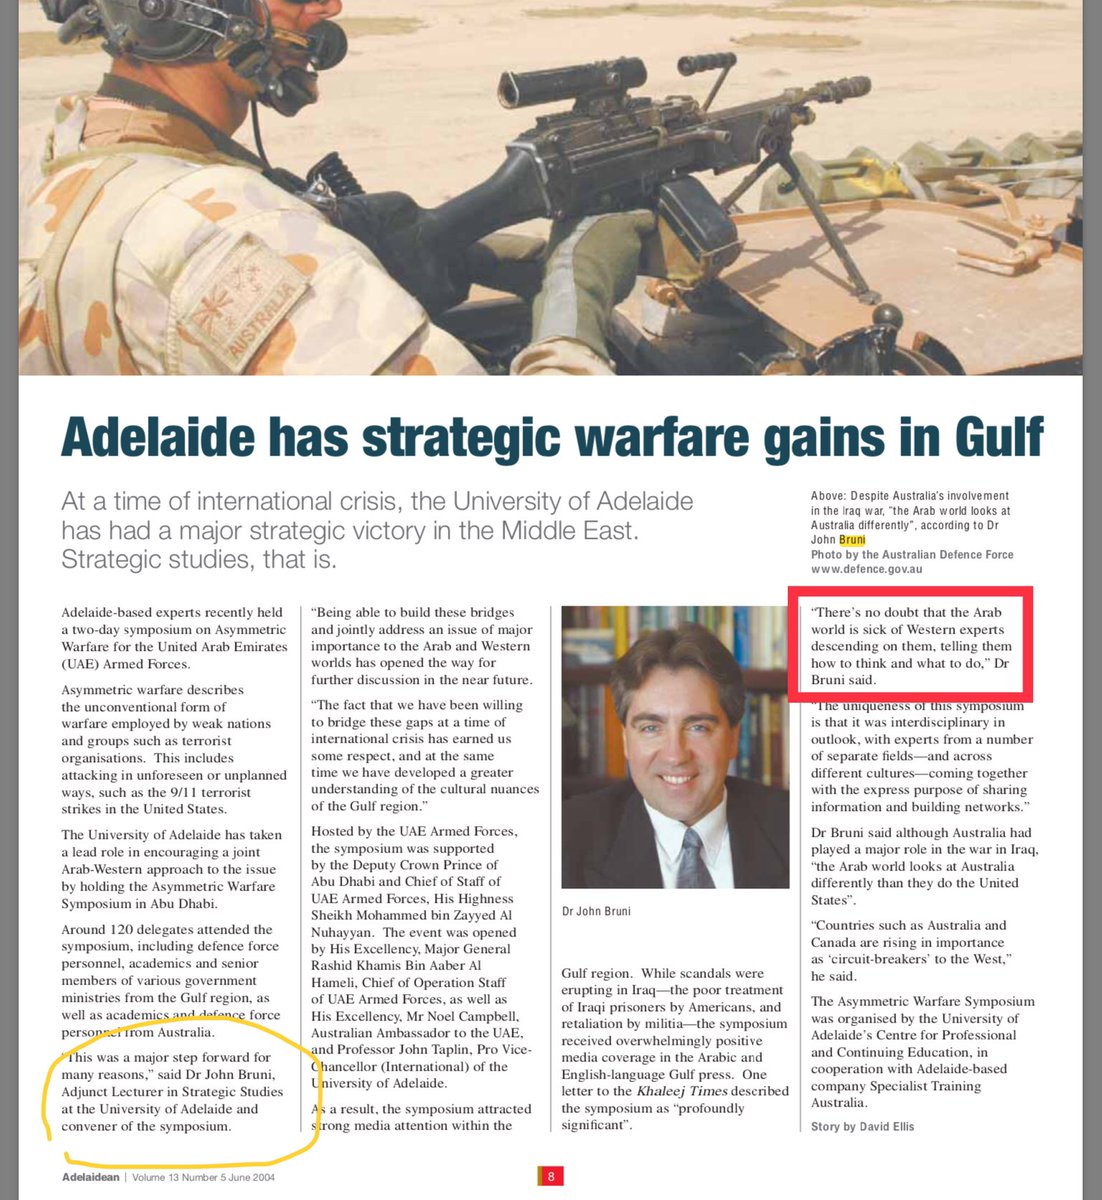 Adelaide has strategic warfare gains in Gulf - “There’s no doubt that the Arab world is sick of Western experts descending on them, telling them how to think and what to do,” John Bruni said.  https://www.adelaide.edu.au/script/adelaidean/archive/2004/issue5_june04.pdf